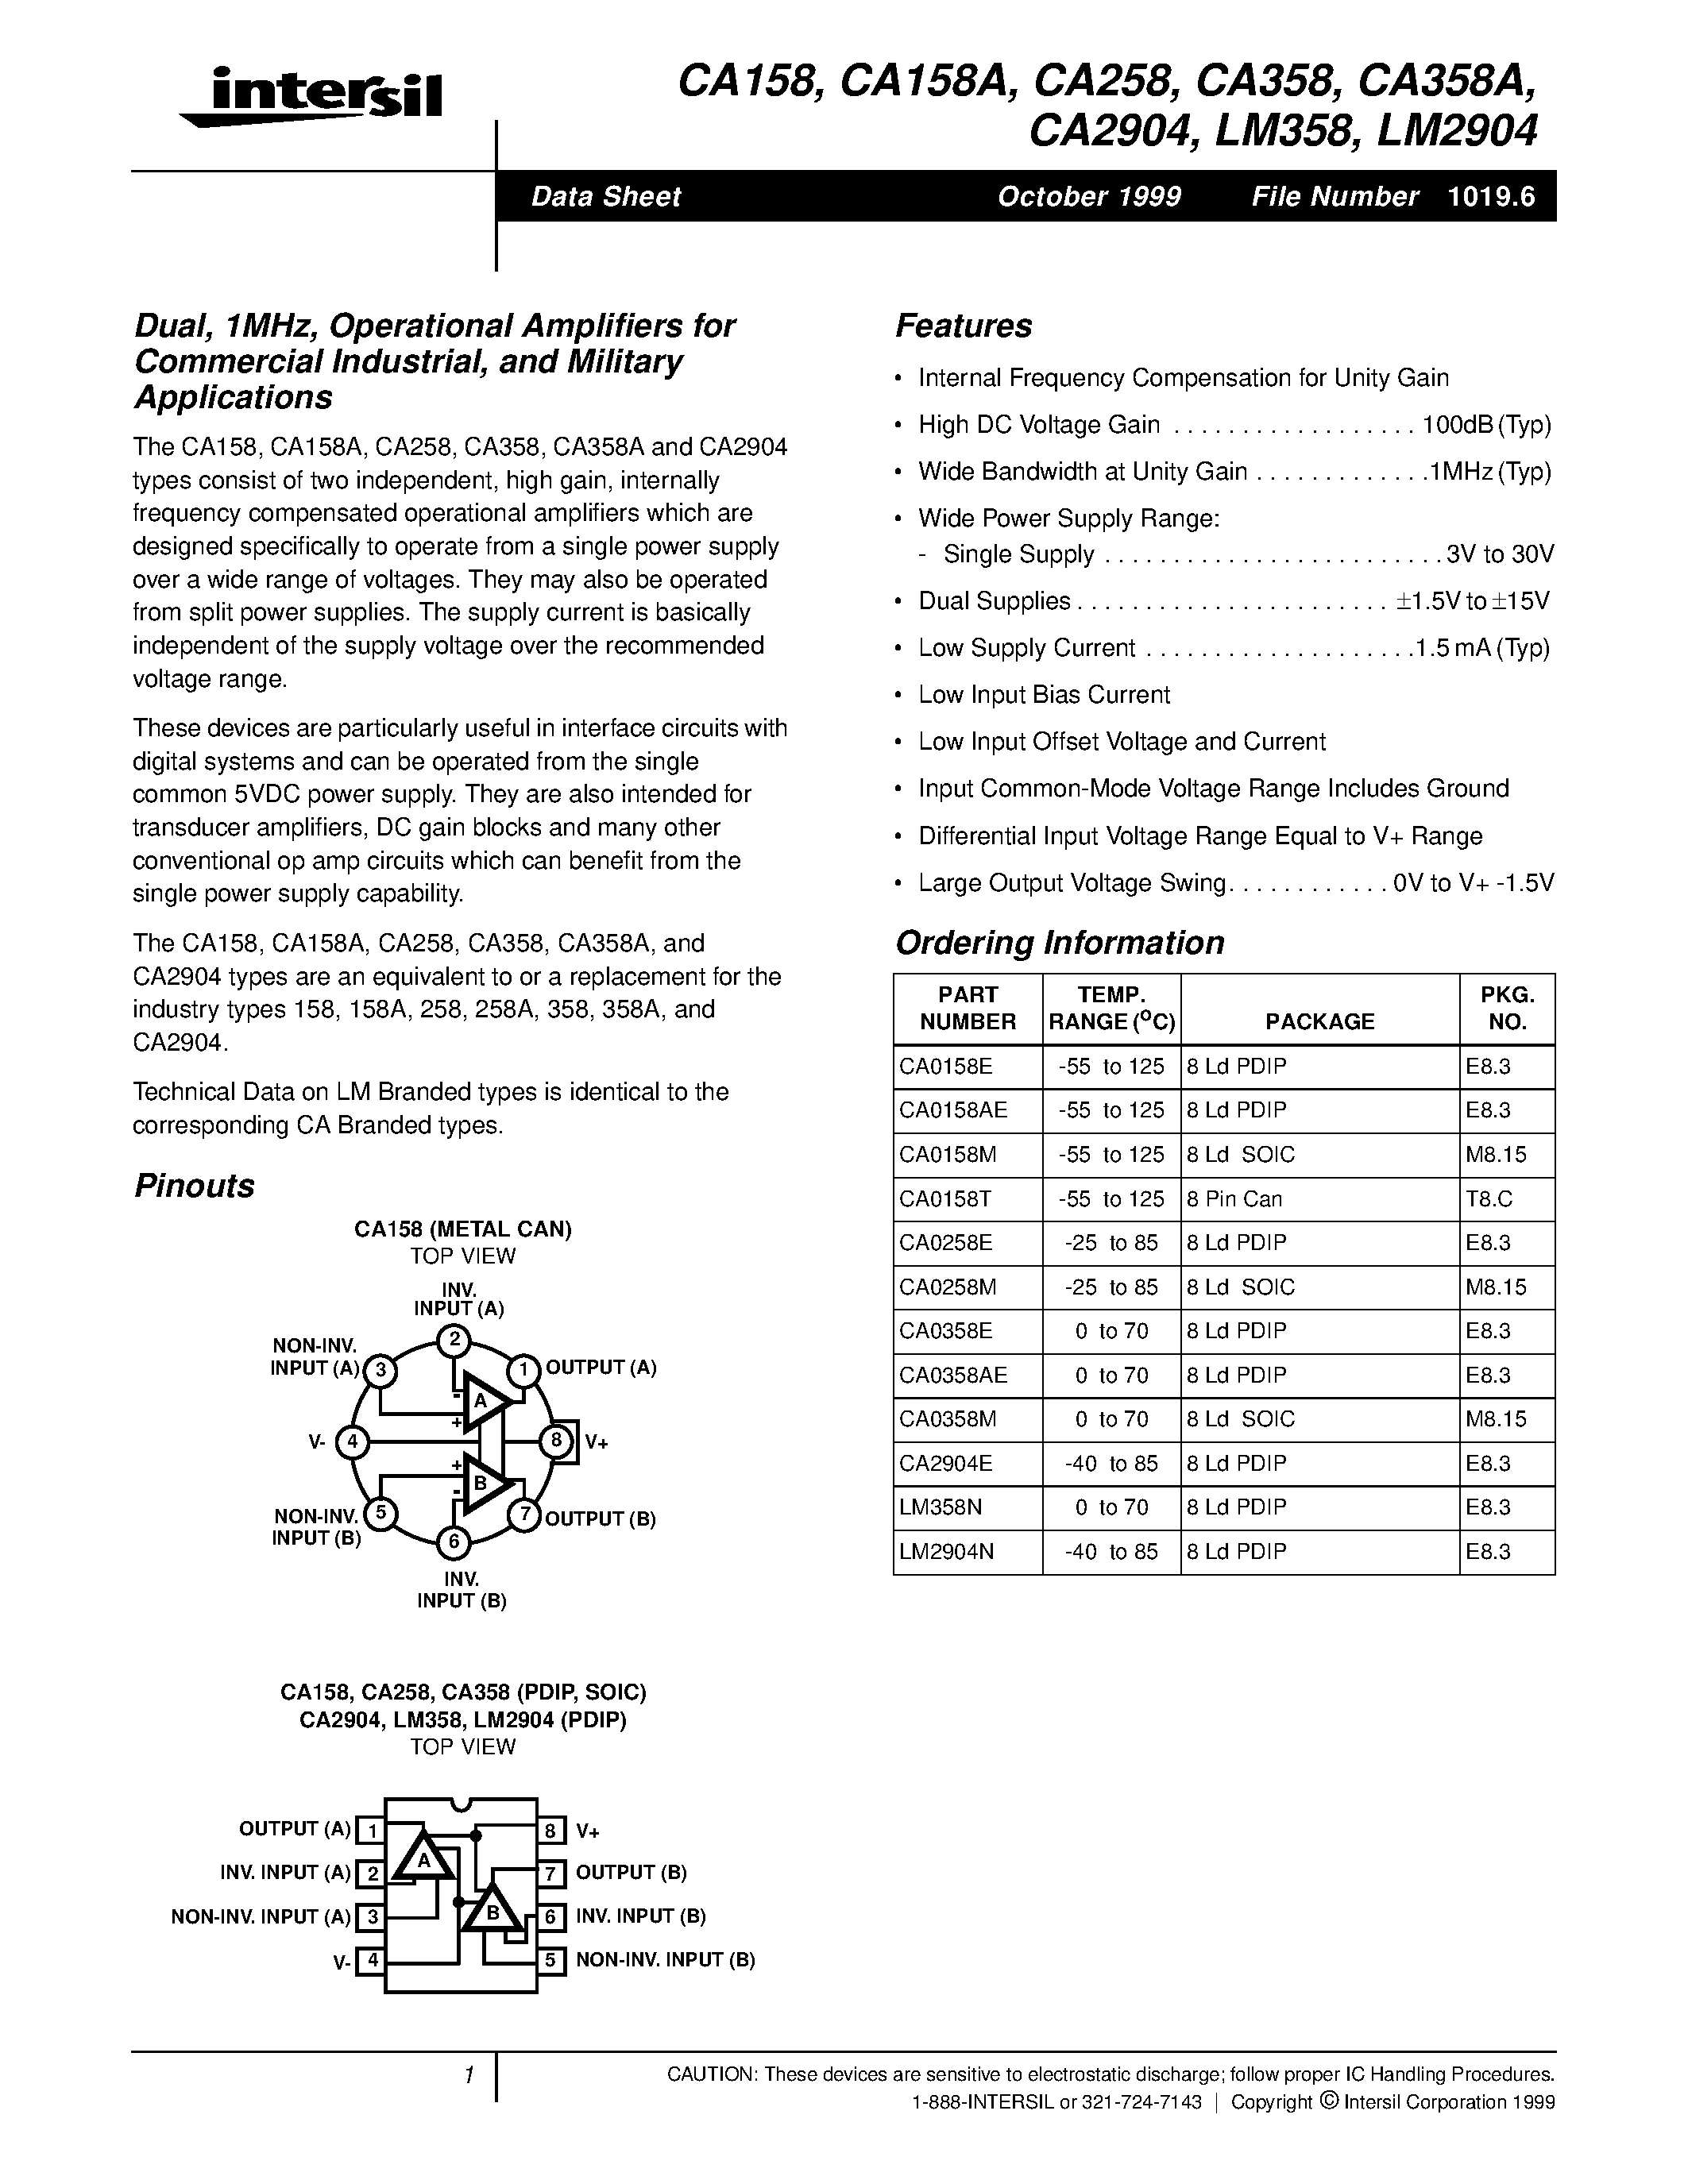 Datasheet CA158 - Operational Amplifiers page 1